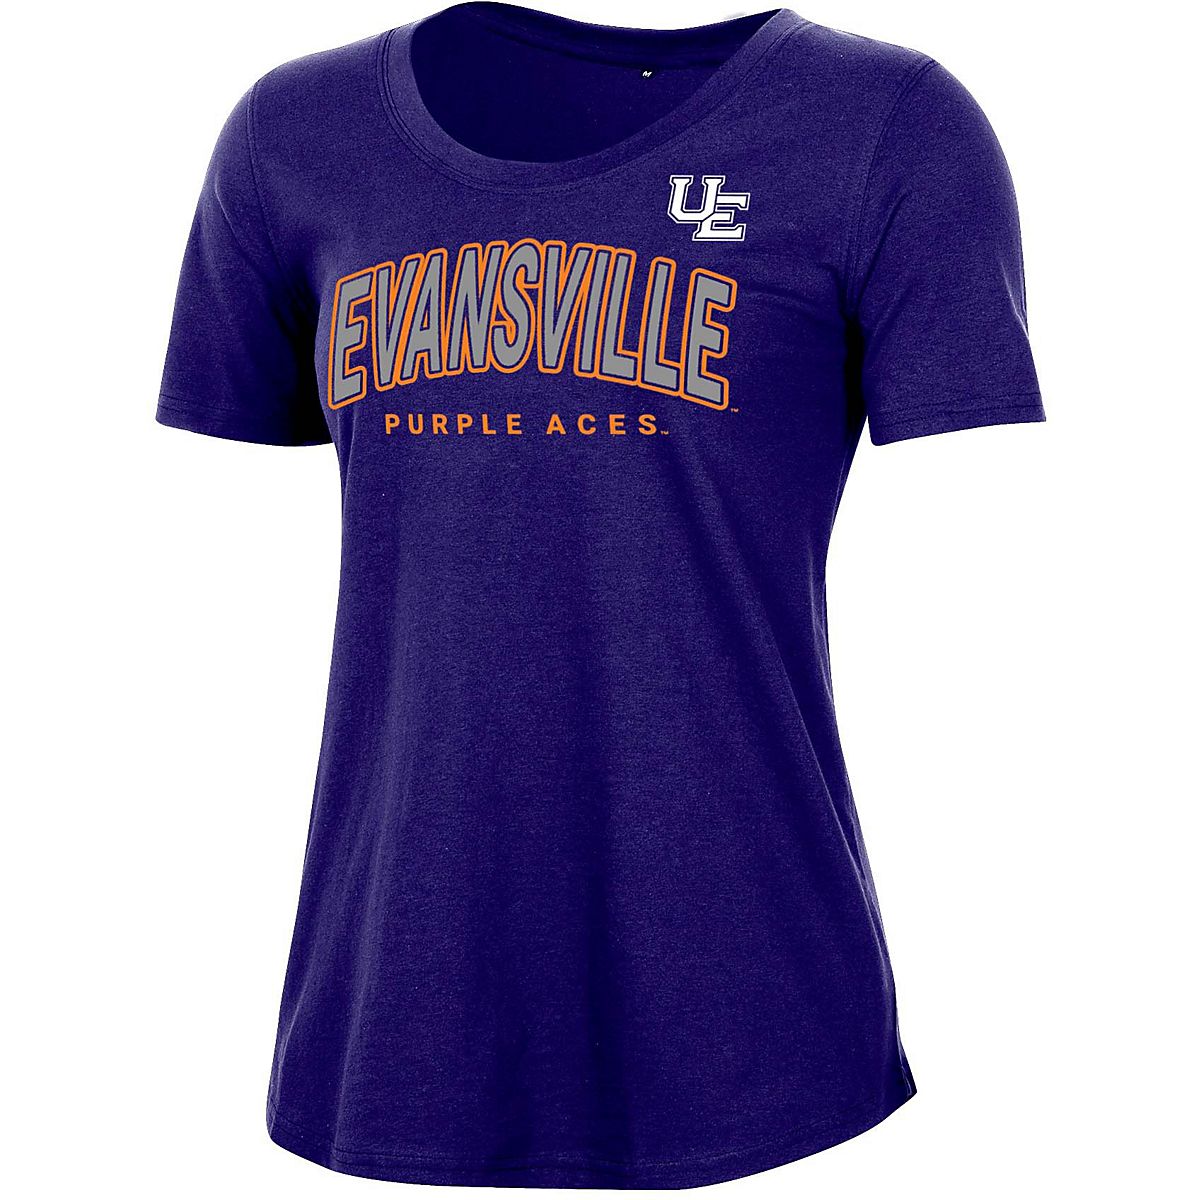 Champion Women’s University of Evansville Relaxed Fit Scoop Neck T ...